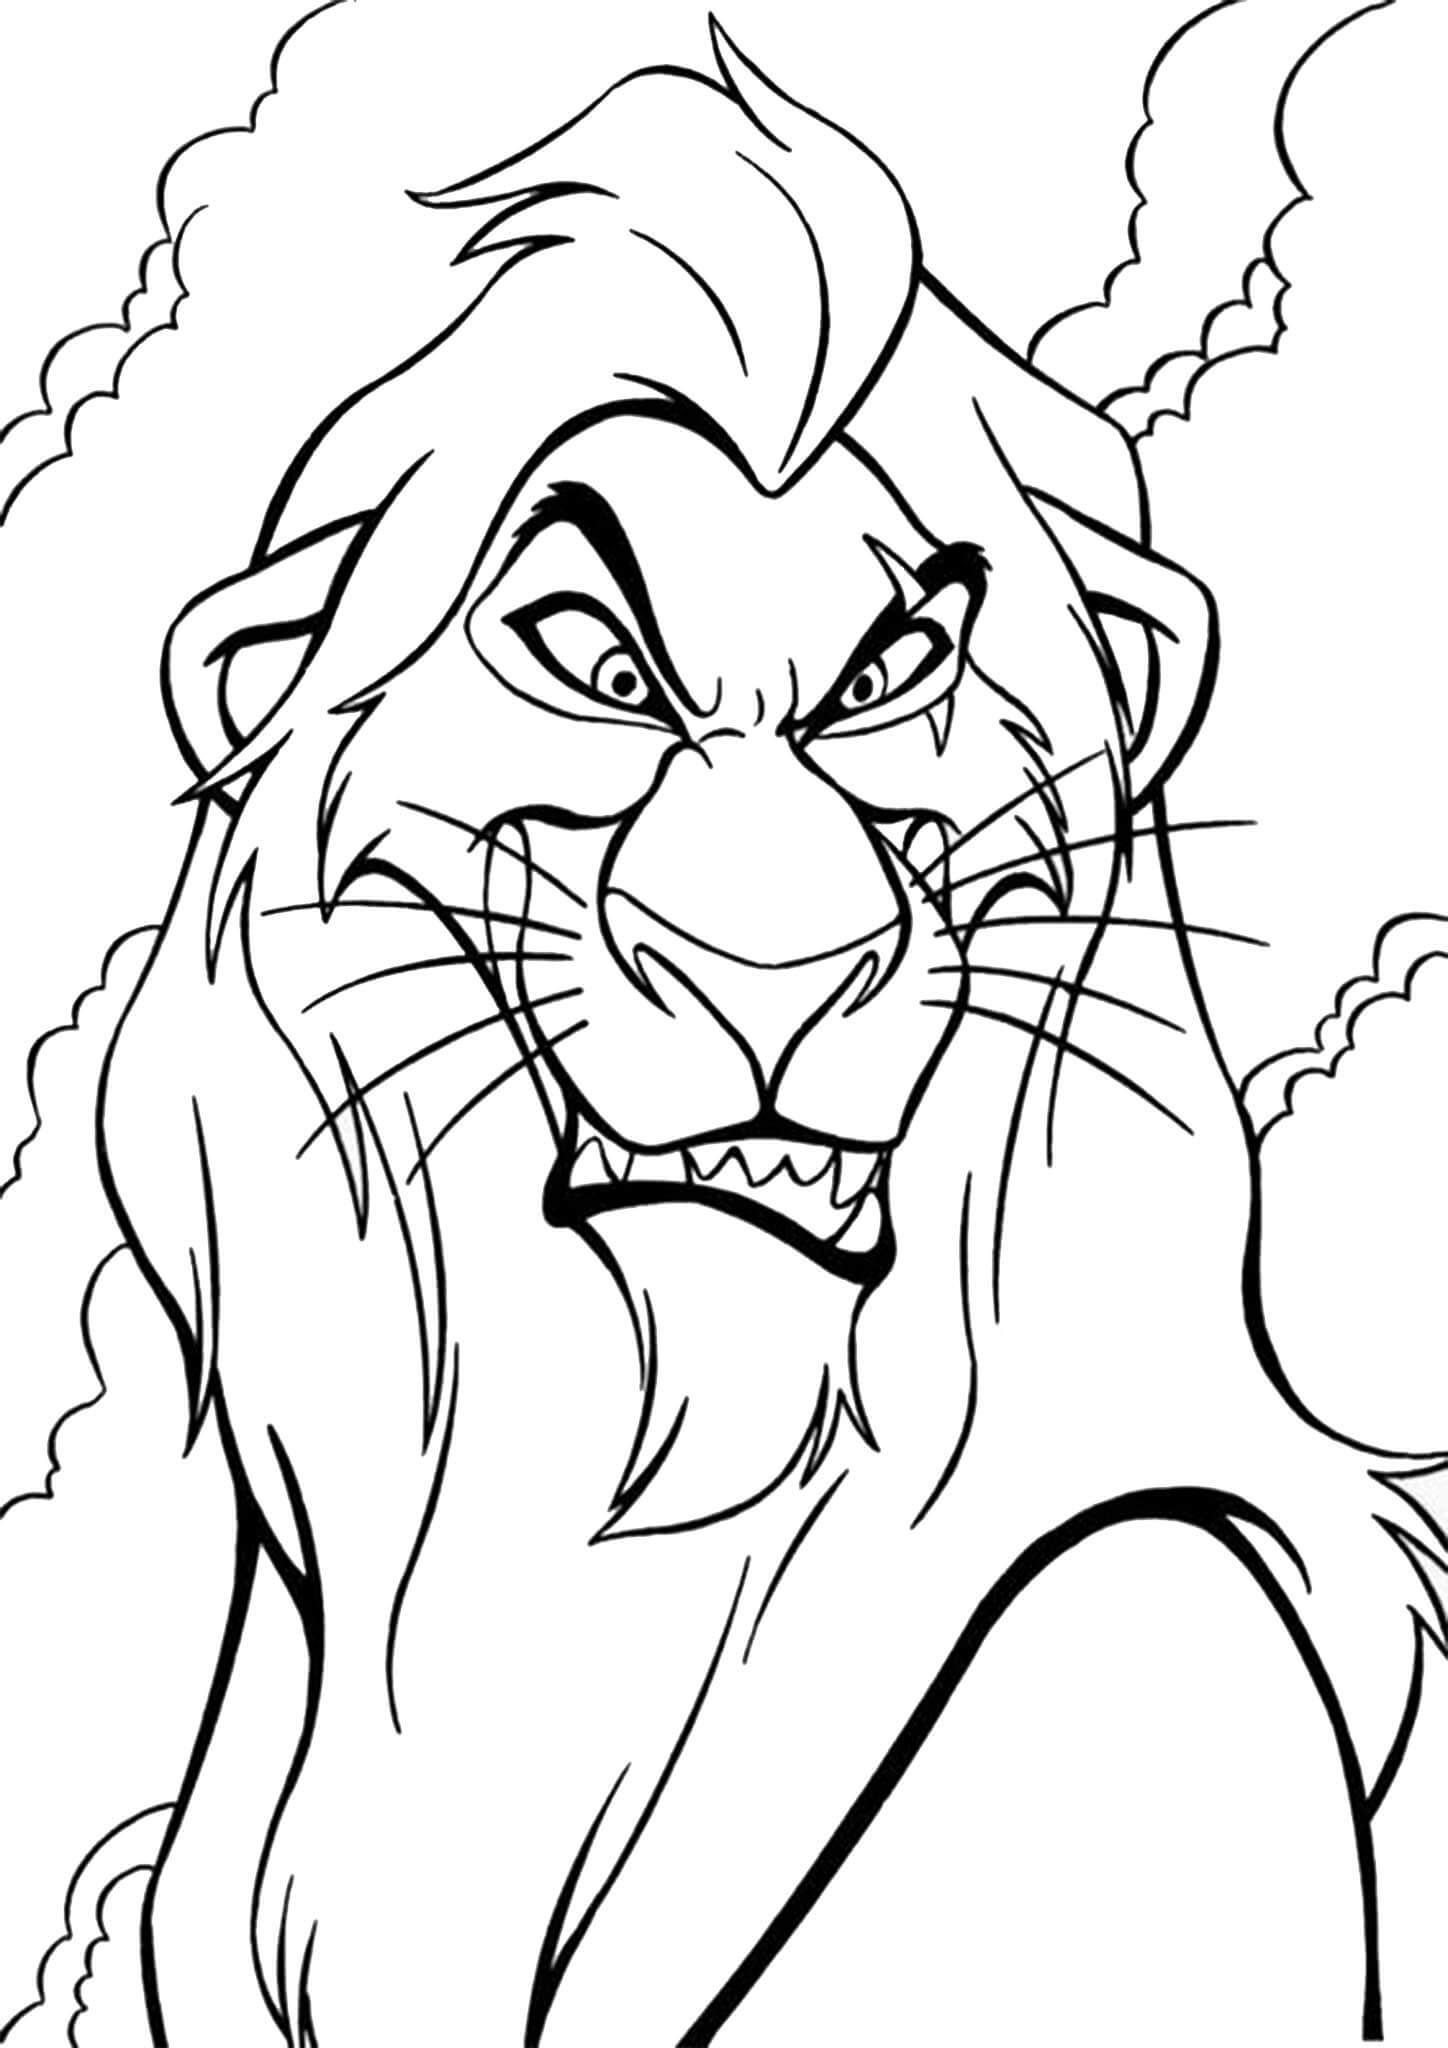 free lion king coloring pages the lion king coloring pages download and print the lion lion coloring free pages king